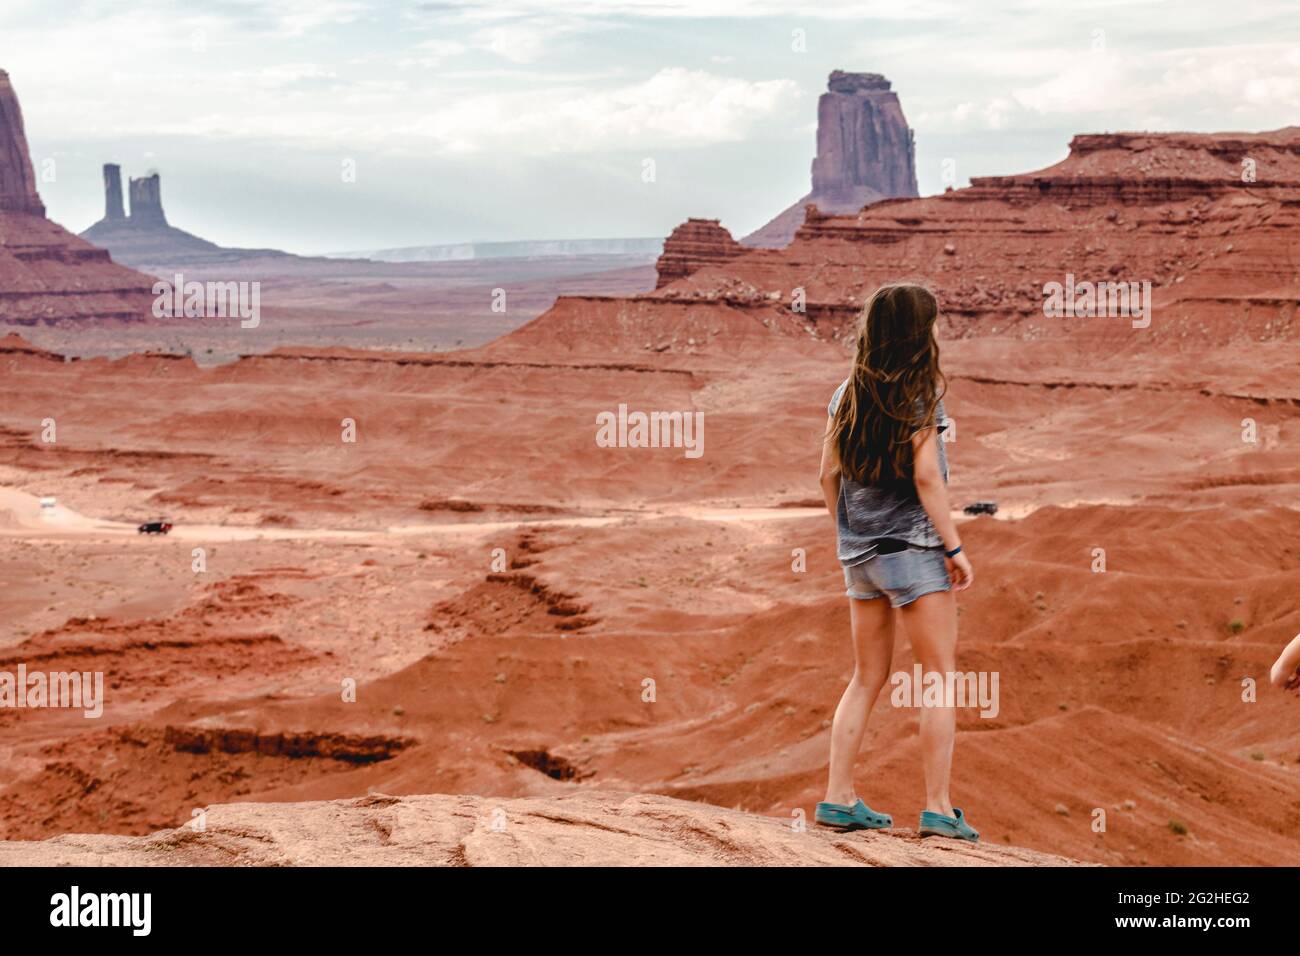 John Ford Point - a lookout with sweeping vistas of craggy buttes, named after the director who show several Movies here at Monument Valley, Arizona, USA Stock Photo